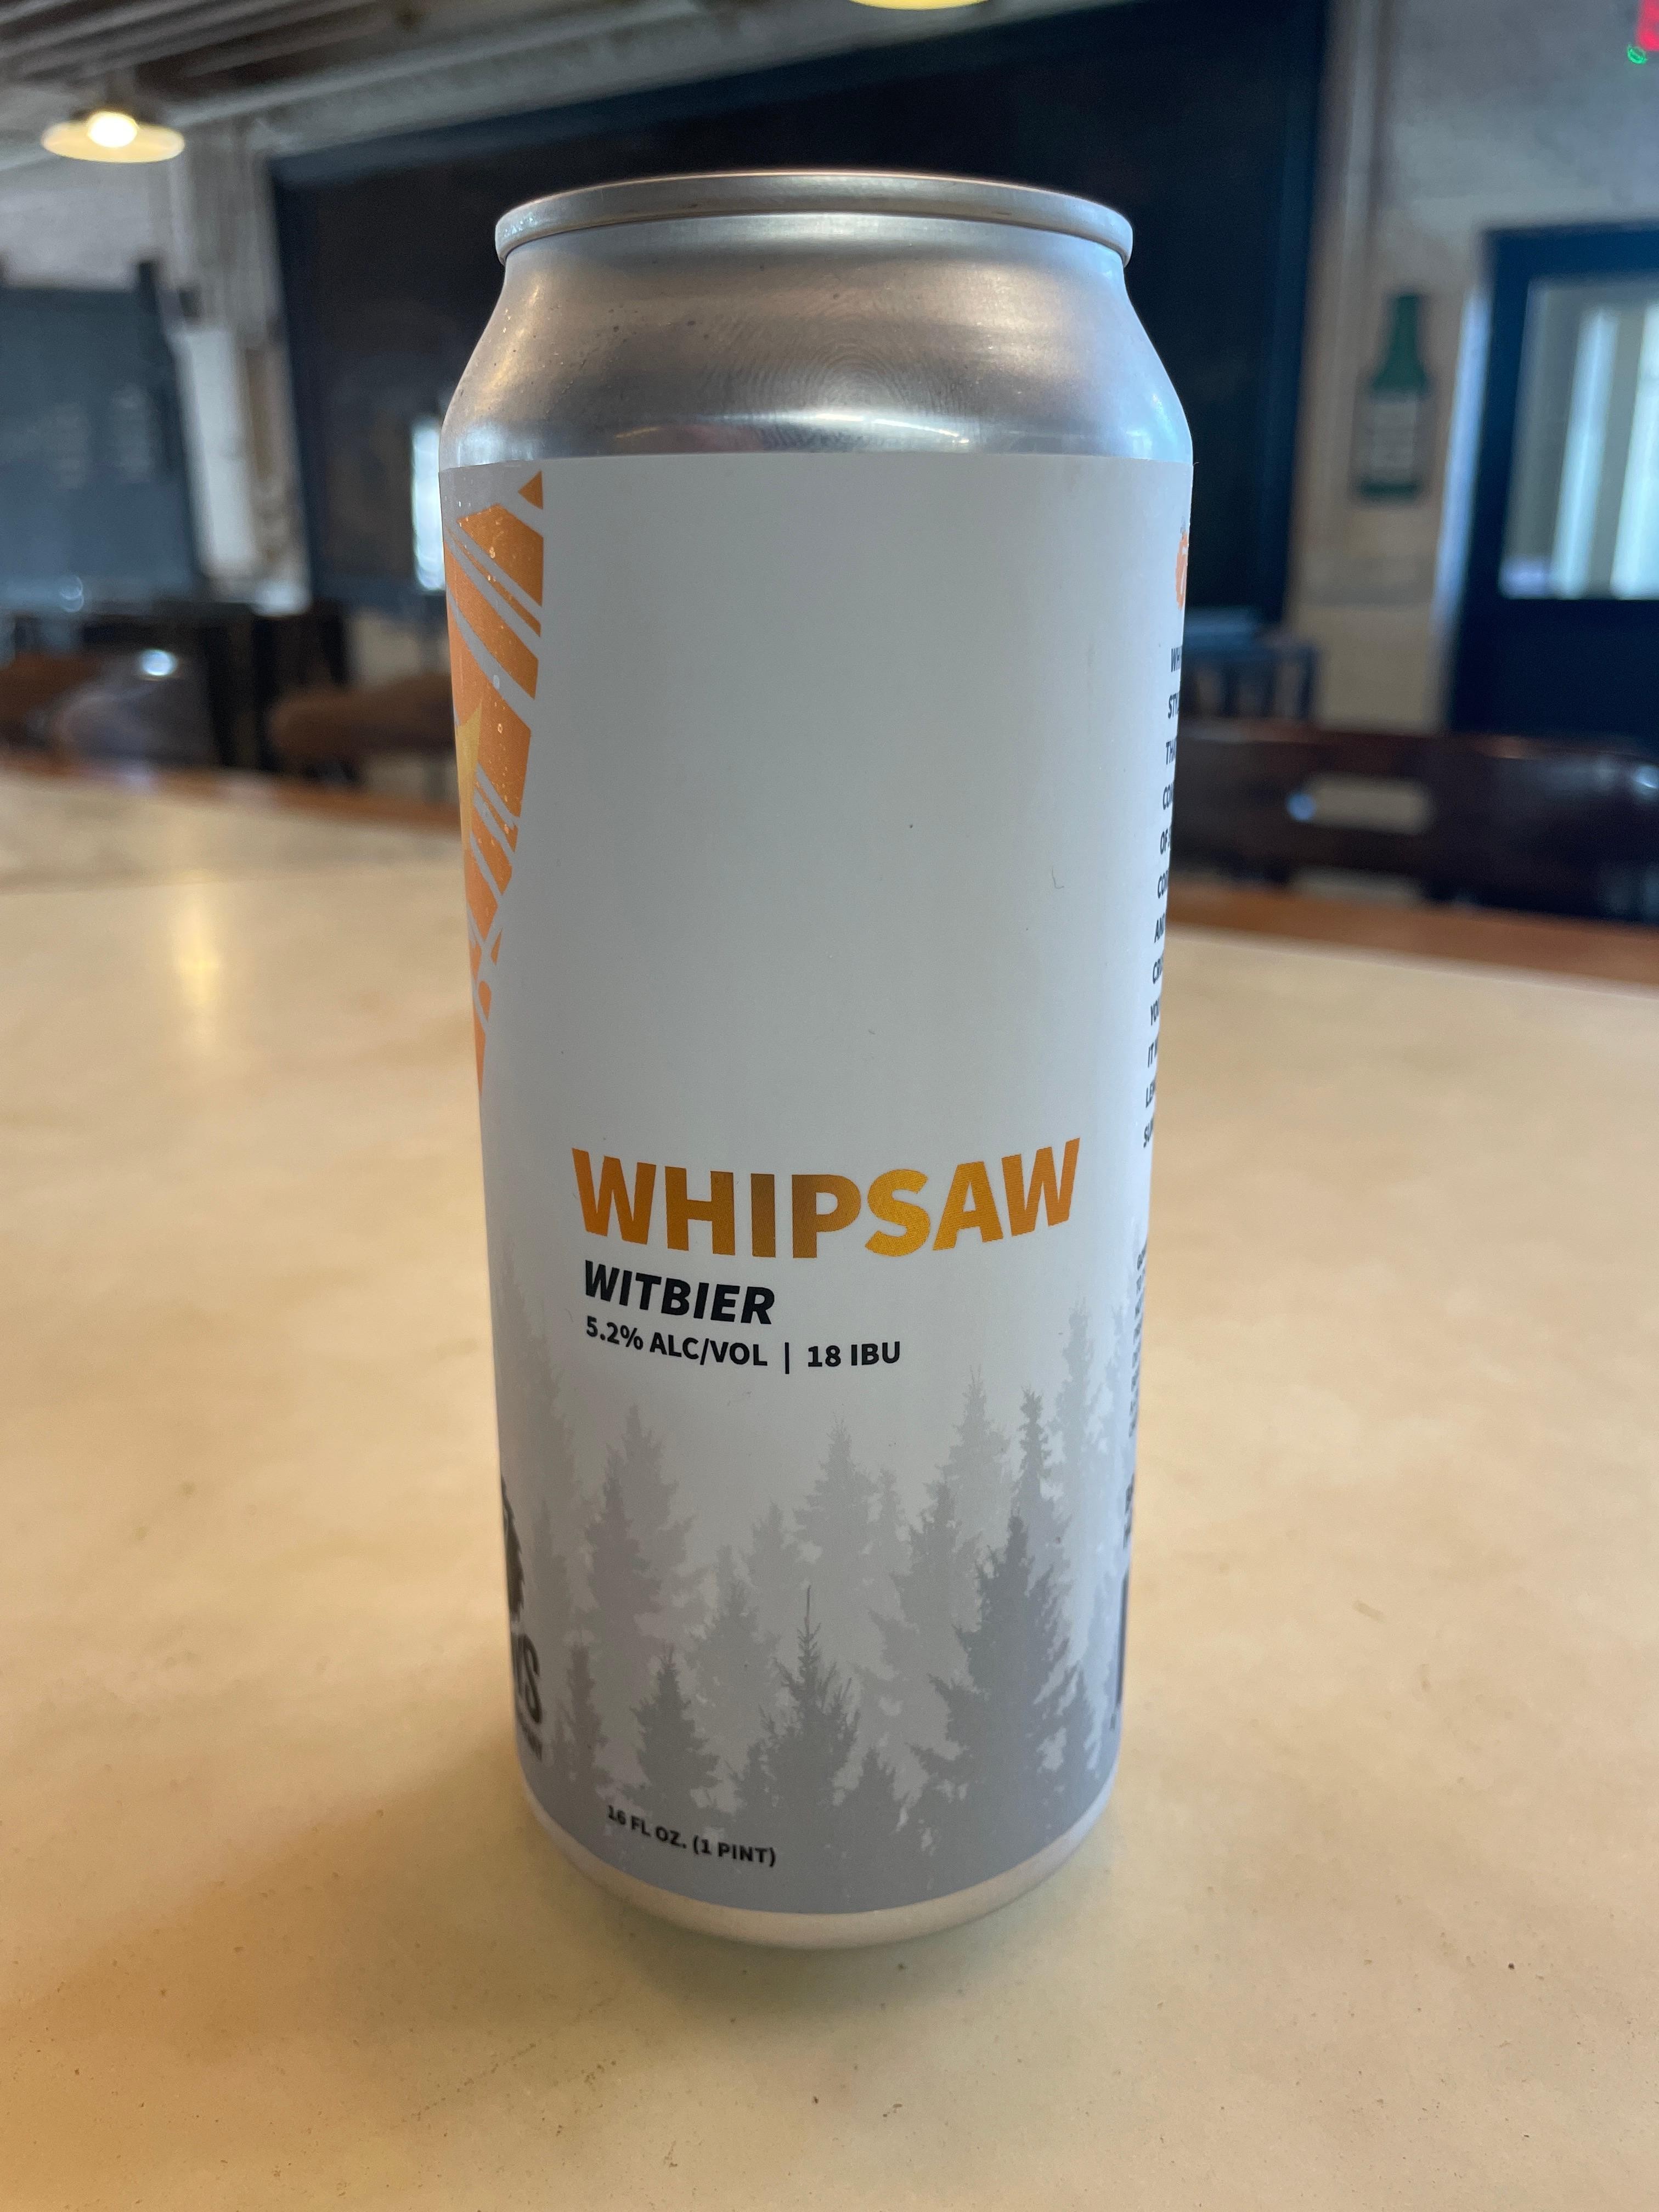 Whipsaw - 7 Saws Brewing Co